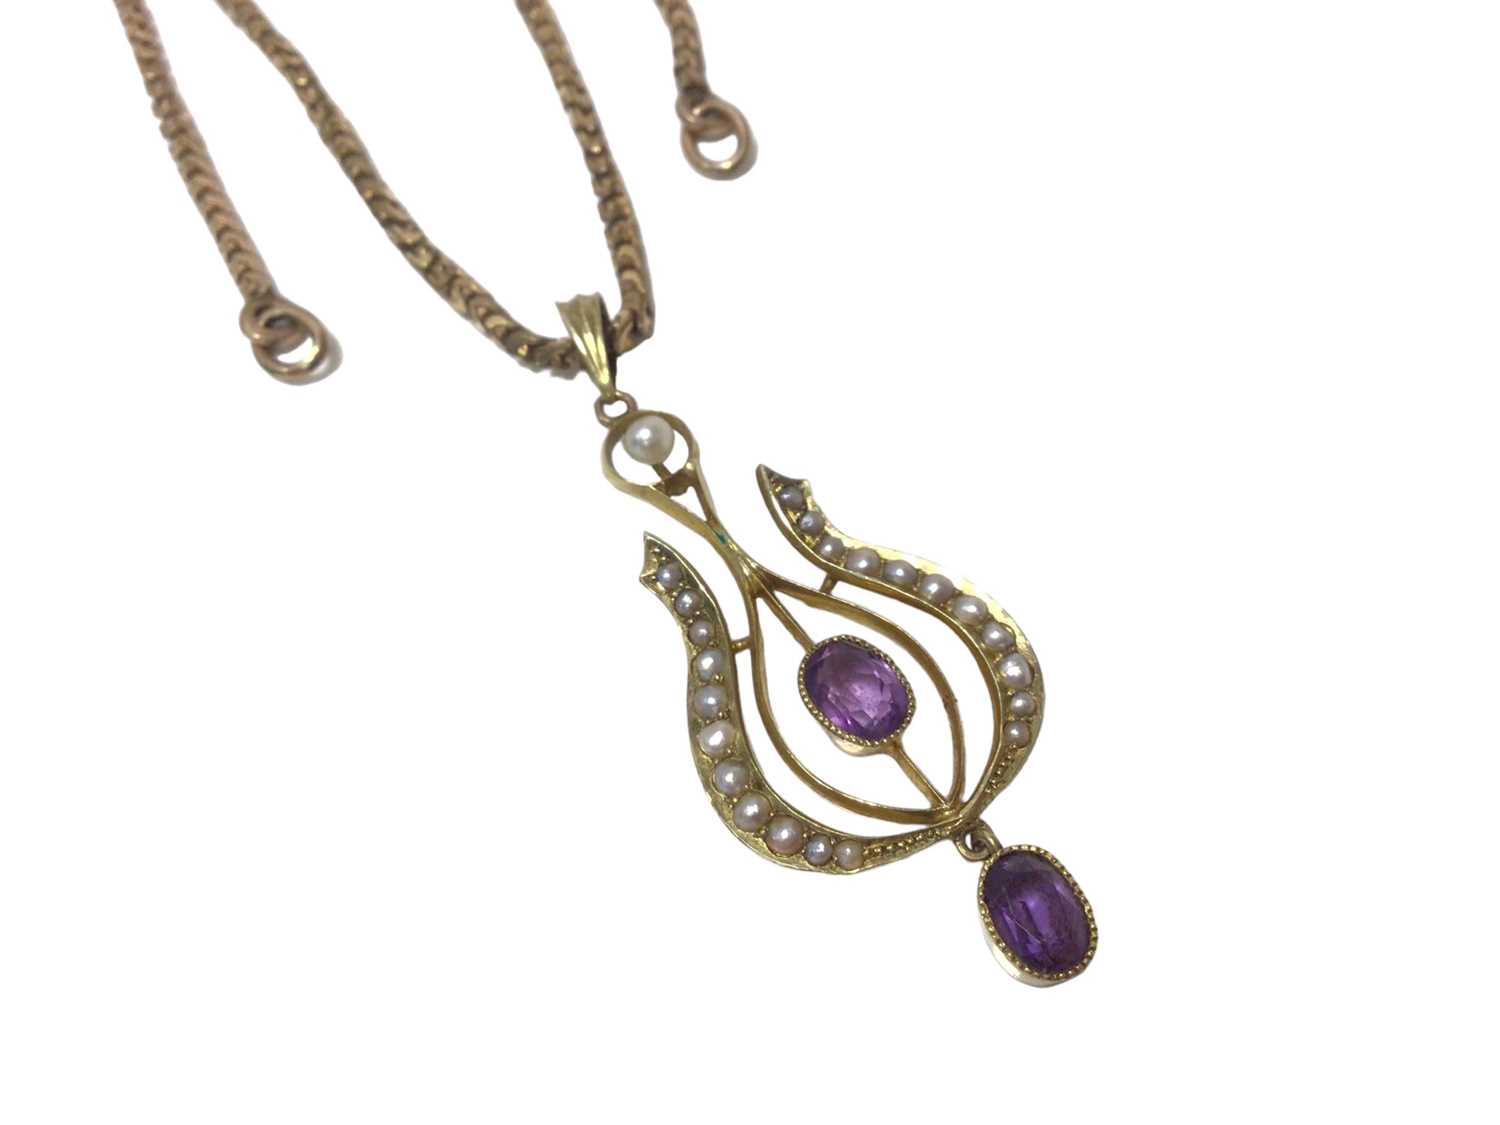 Edwardian 14K gold sapphire and seed pearl bar brooch and similar amethyst and seed pearl pendant on - Image 4 of 5